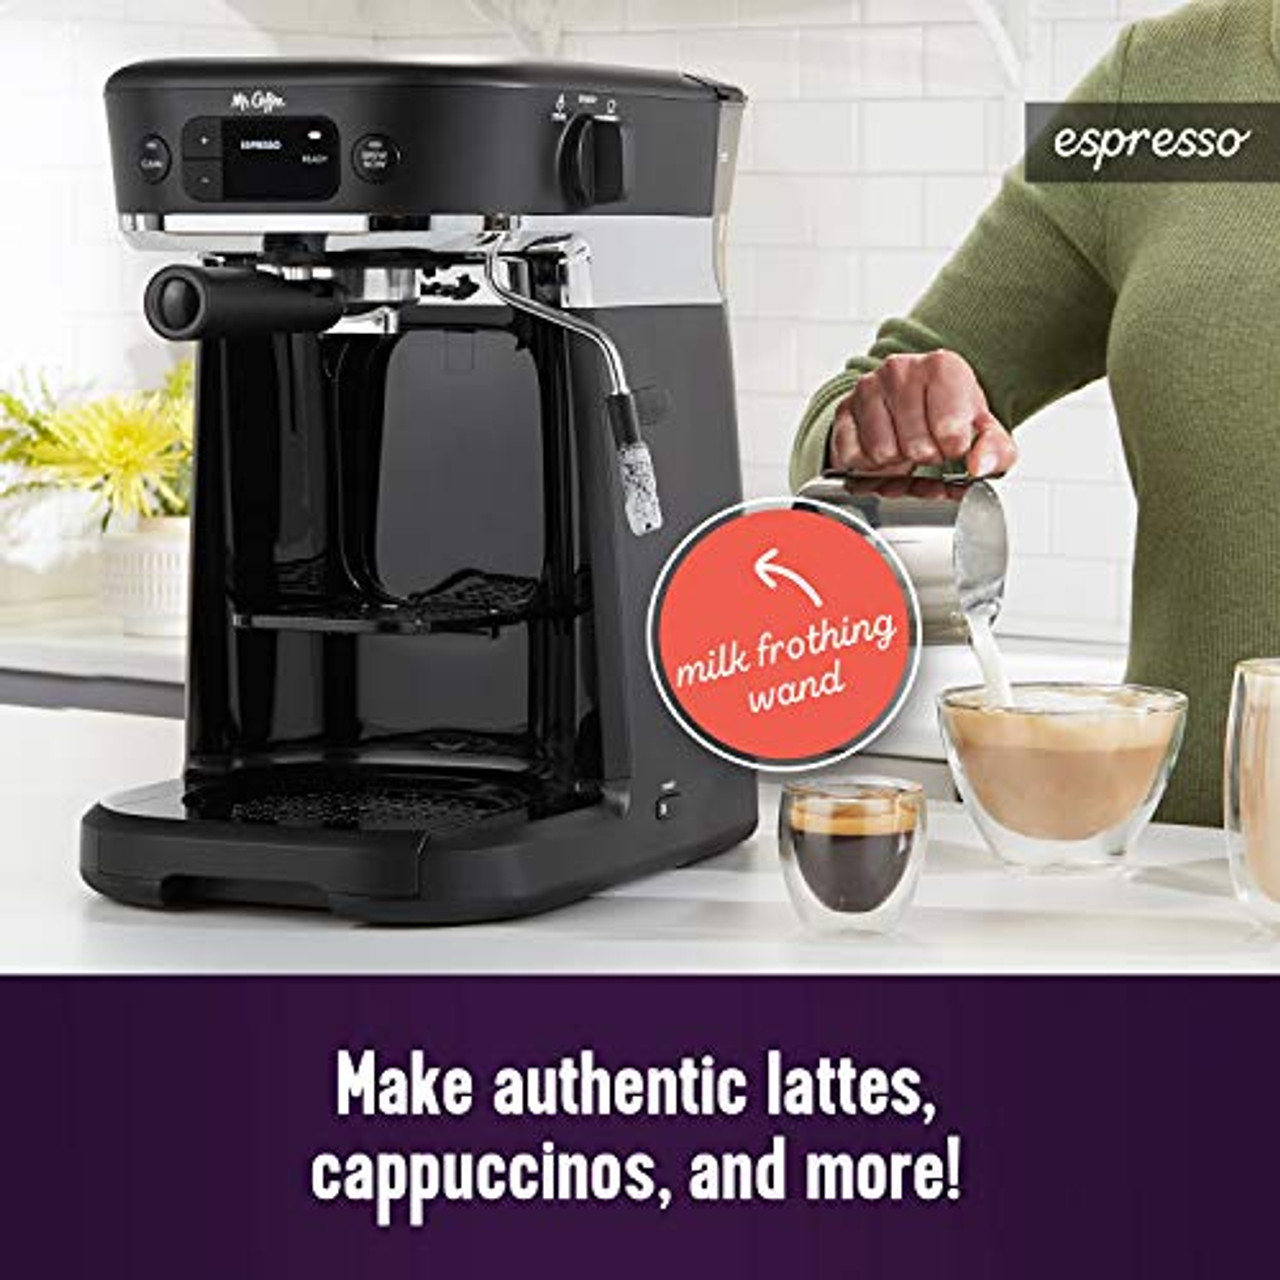 Mr. Coffee 10-Cup Programmable Coffeemaker with Thermal Carafe